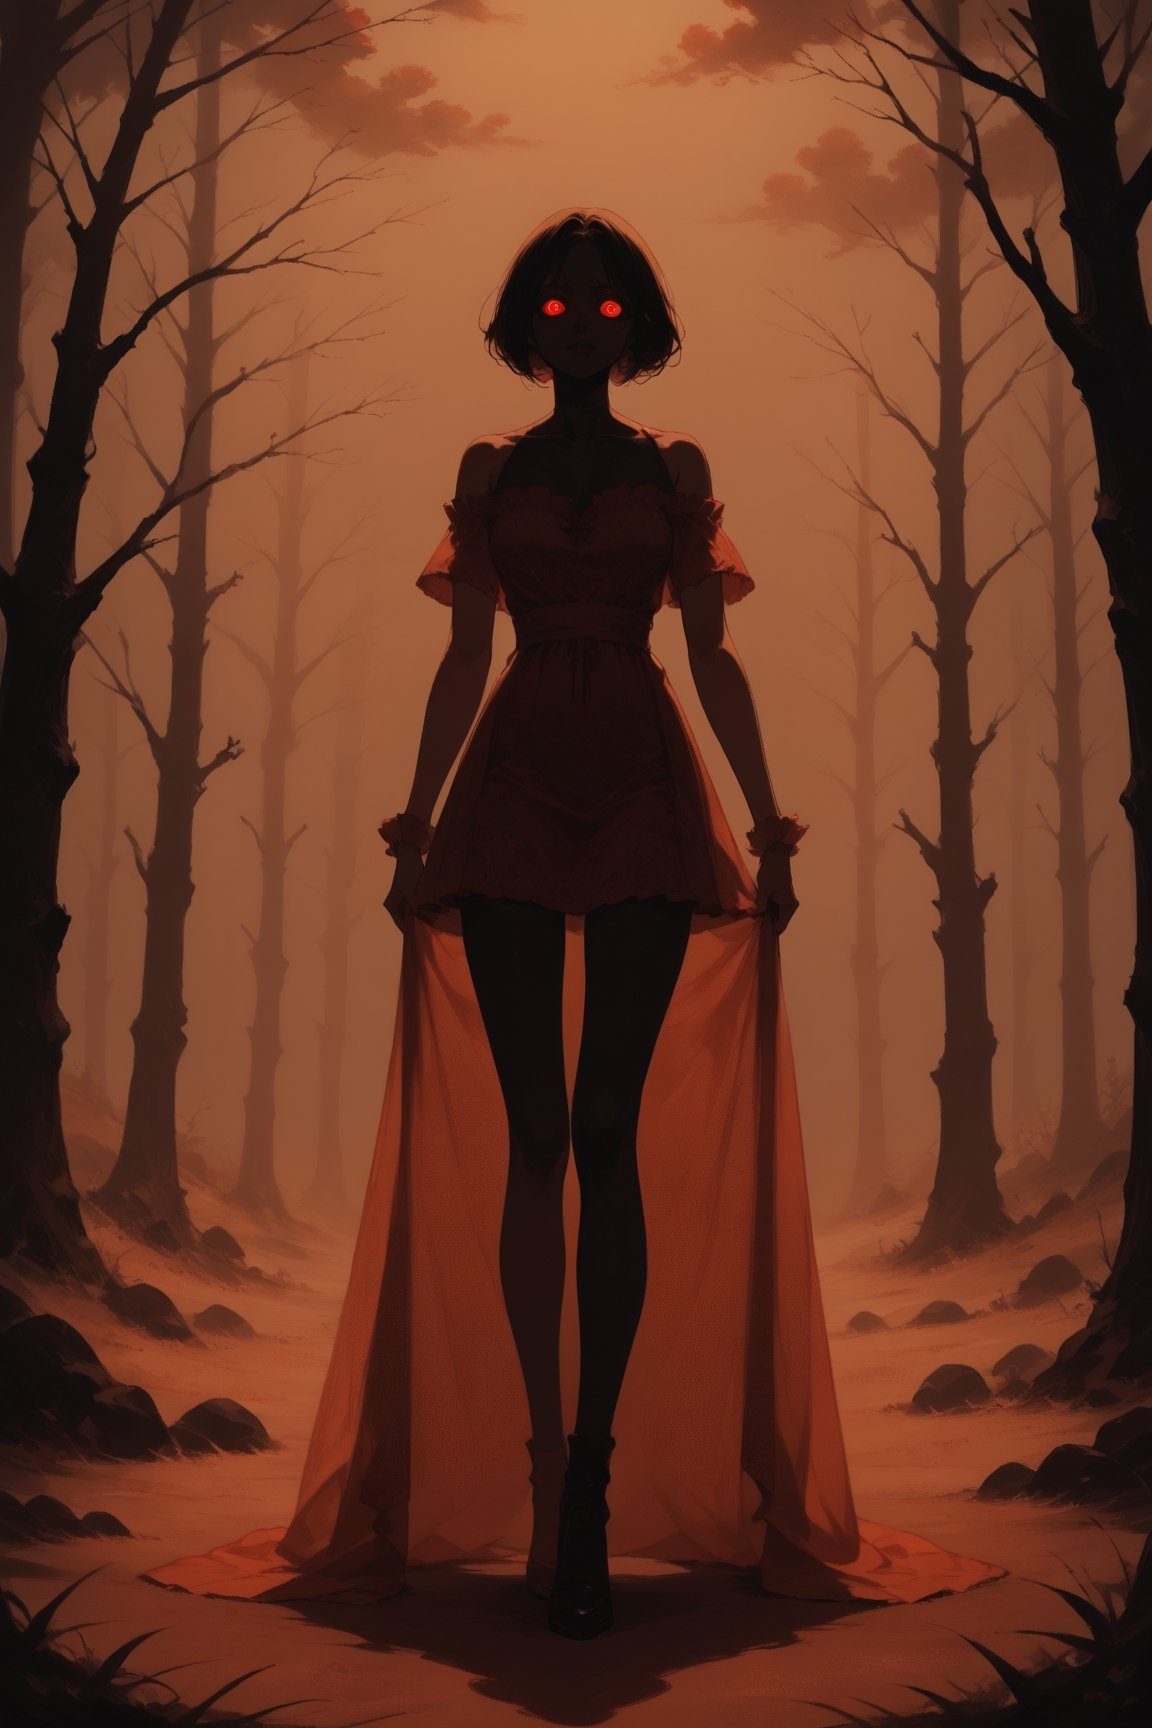 SCORE_9, SCORE_8_UP, SCORE_7_UP, SCORE_6_UP,

BEST QUALITY, HIGHRES, ABSURDRES,
MASTERPIECE, VERY AESTHETIC, 
INTRICATE DETAILS, PERFECTEYES,

(red theme:1.2), horror theme, forest background,
1girl, (silhouette:1.4), backlighting, glowing eyes, mini_dress,
facing_viewer, full_body, shadows, ,score_9